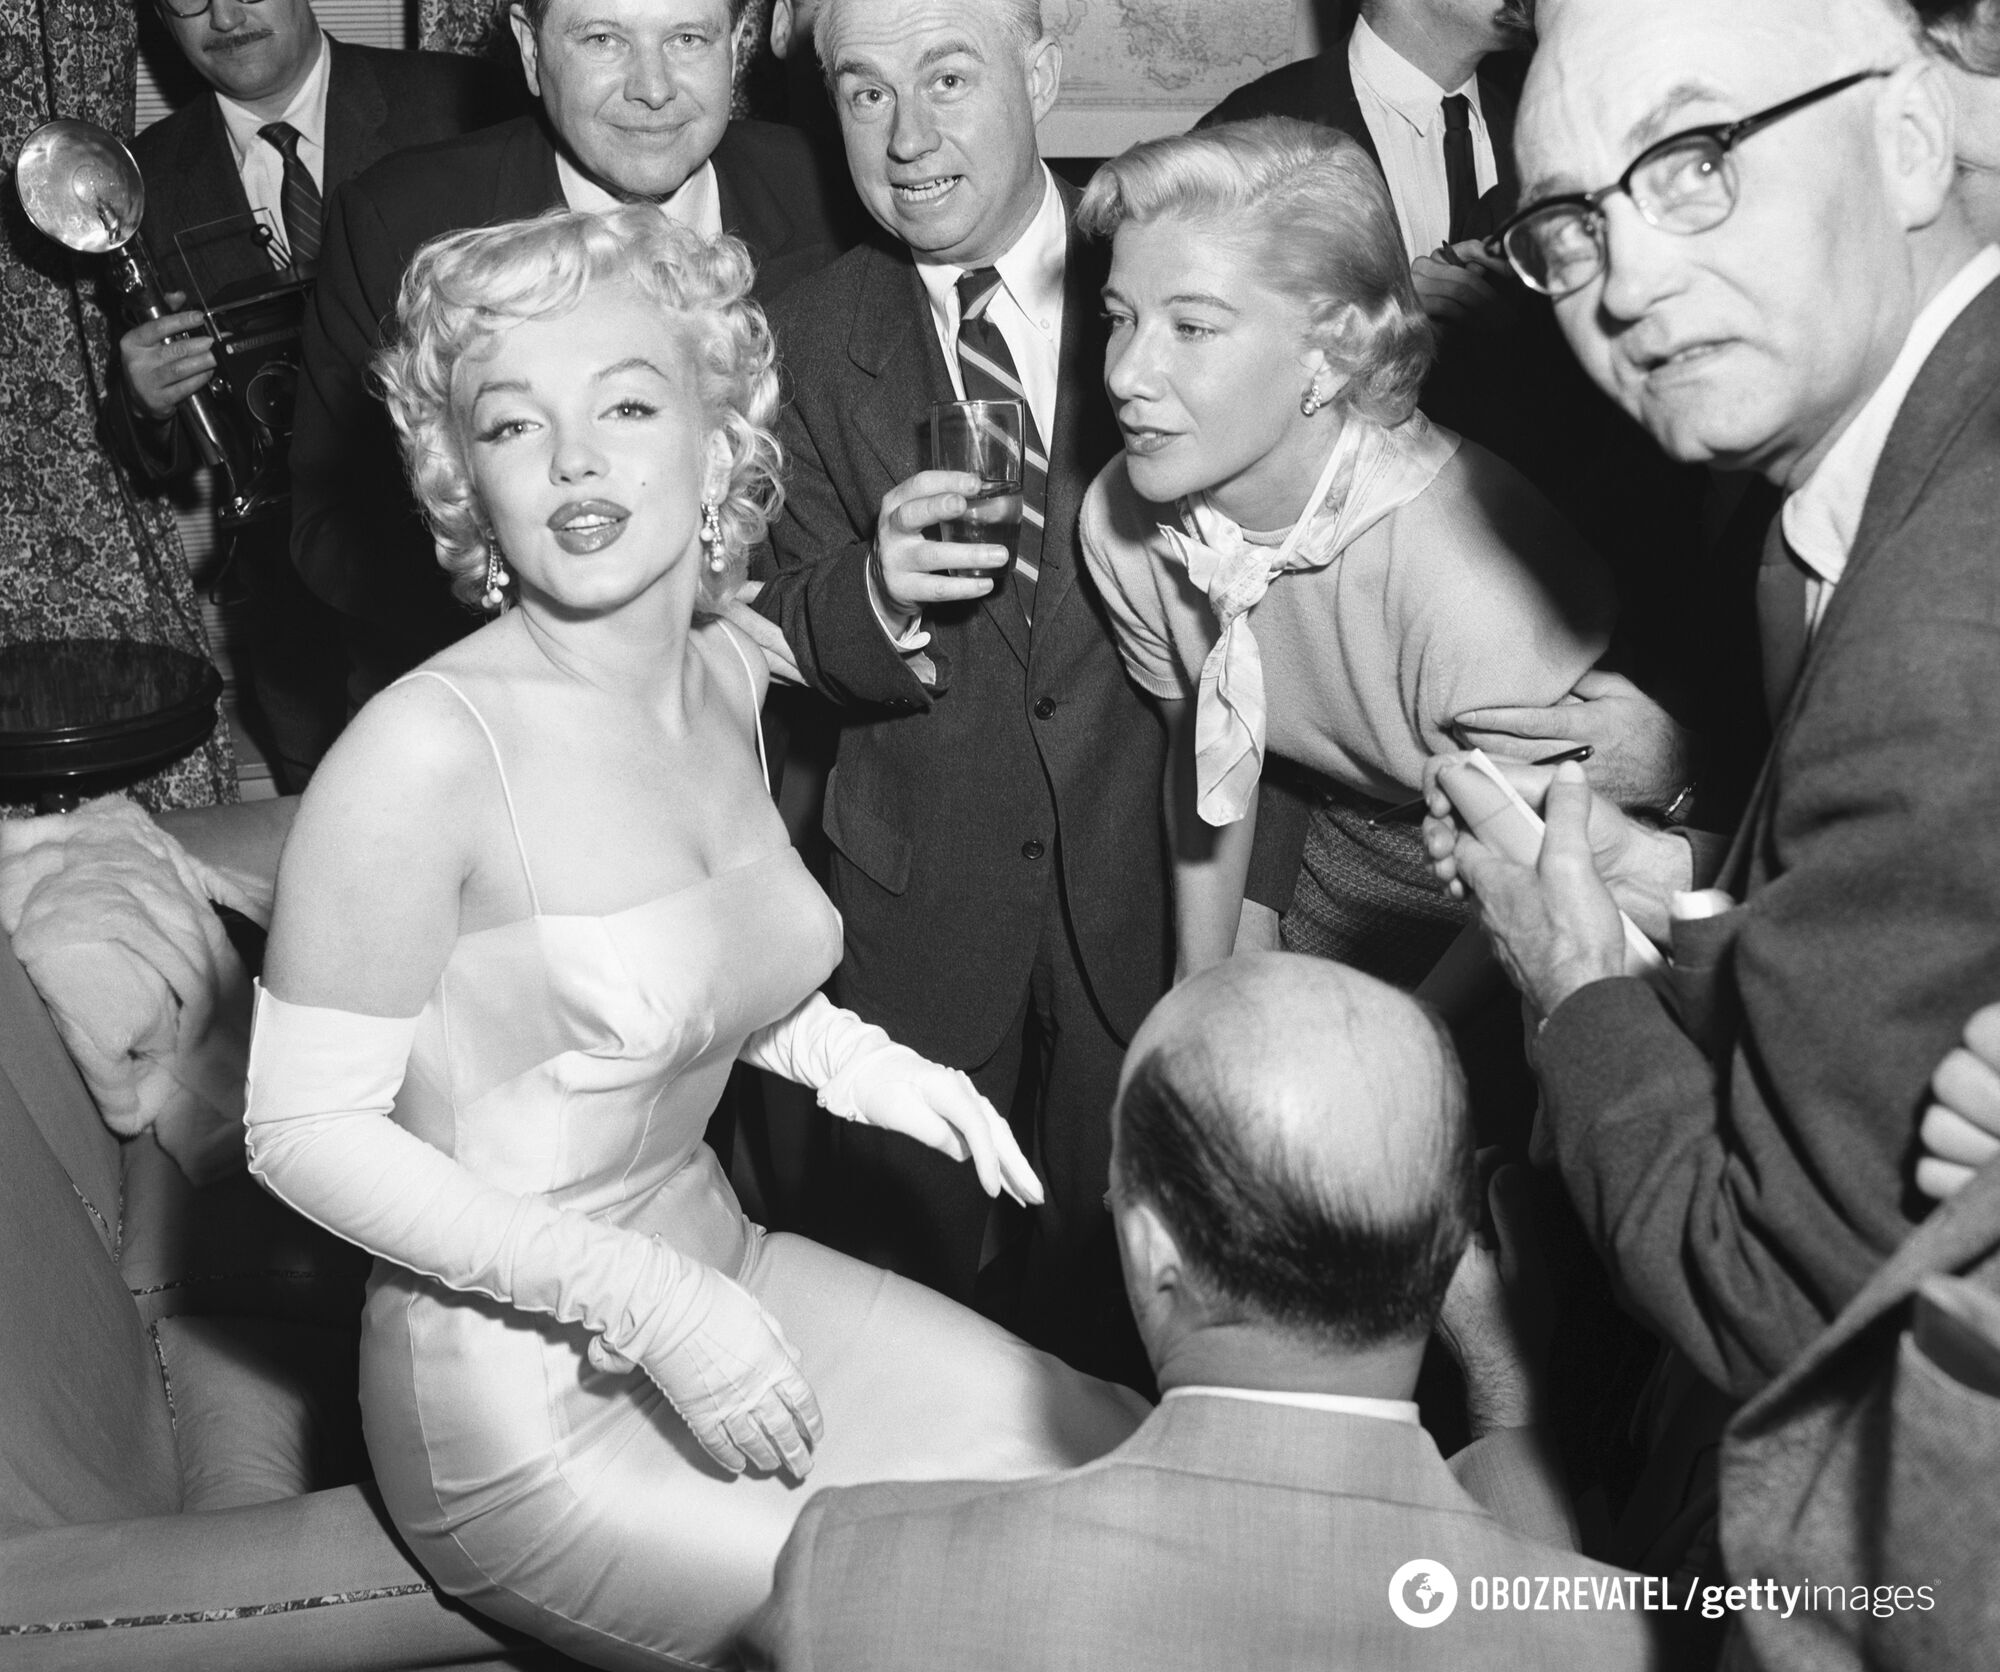 ''I always knew who killed her''. Resonant facts about Marilyn Monroe's death have become known